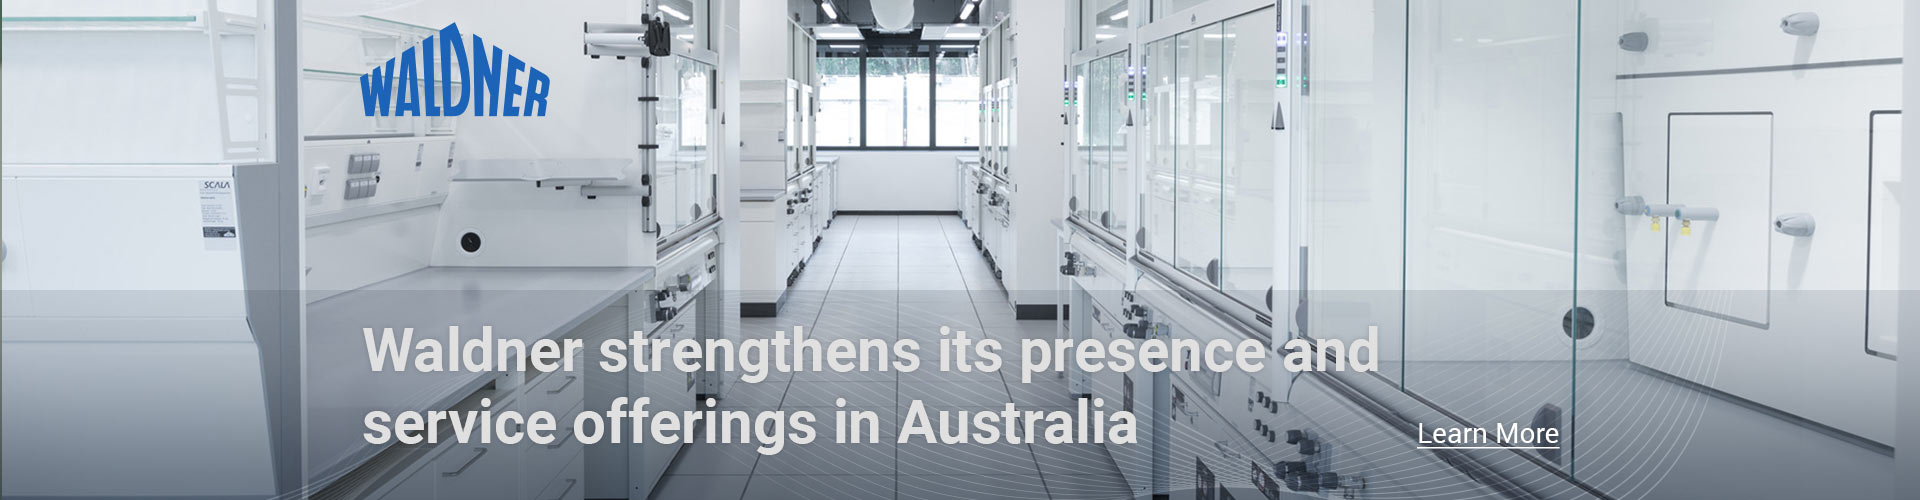 Learn About Waldner strengthening its presence and service offerings in Australia